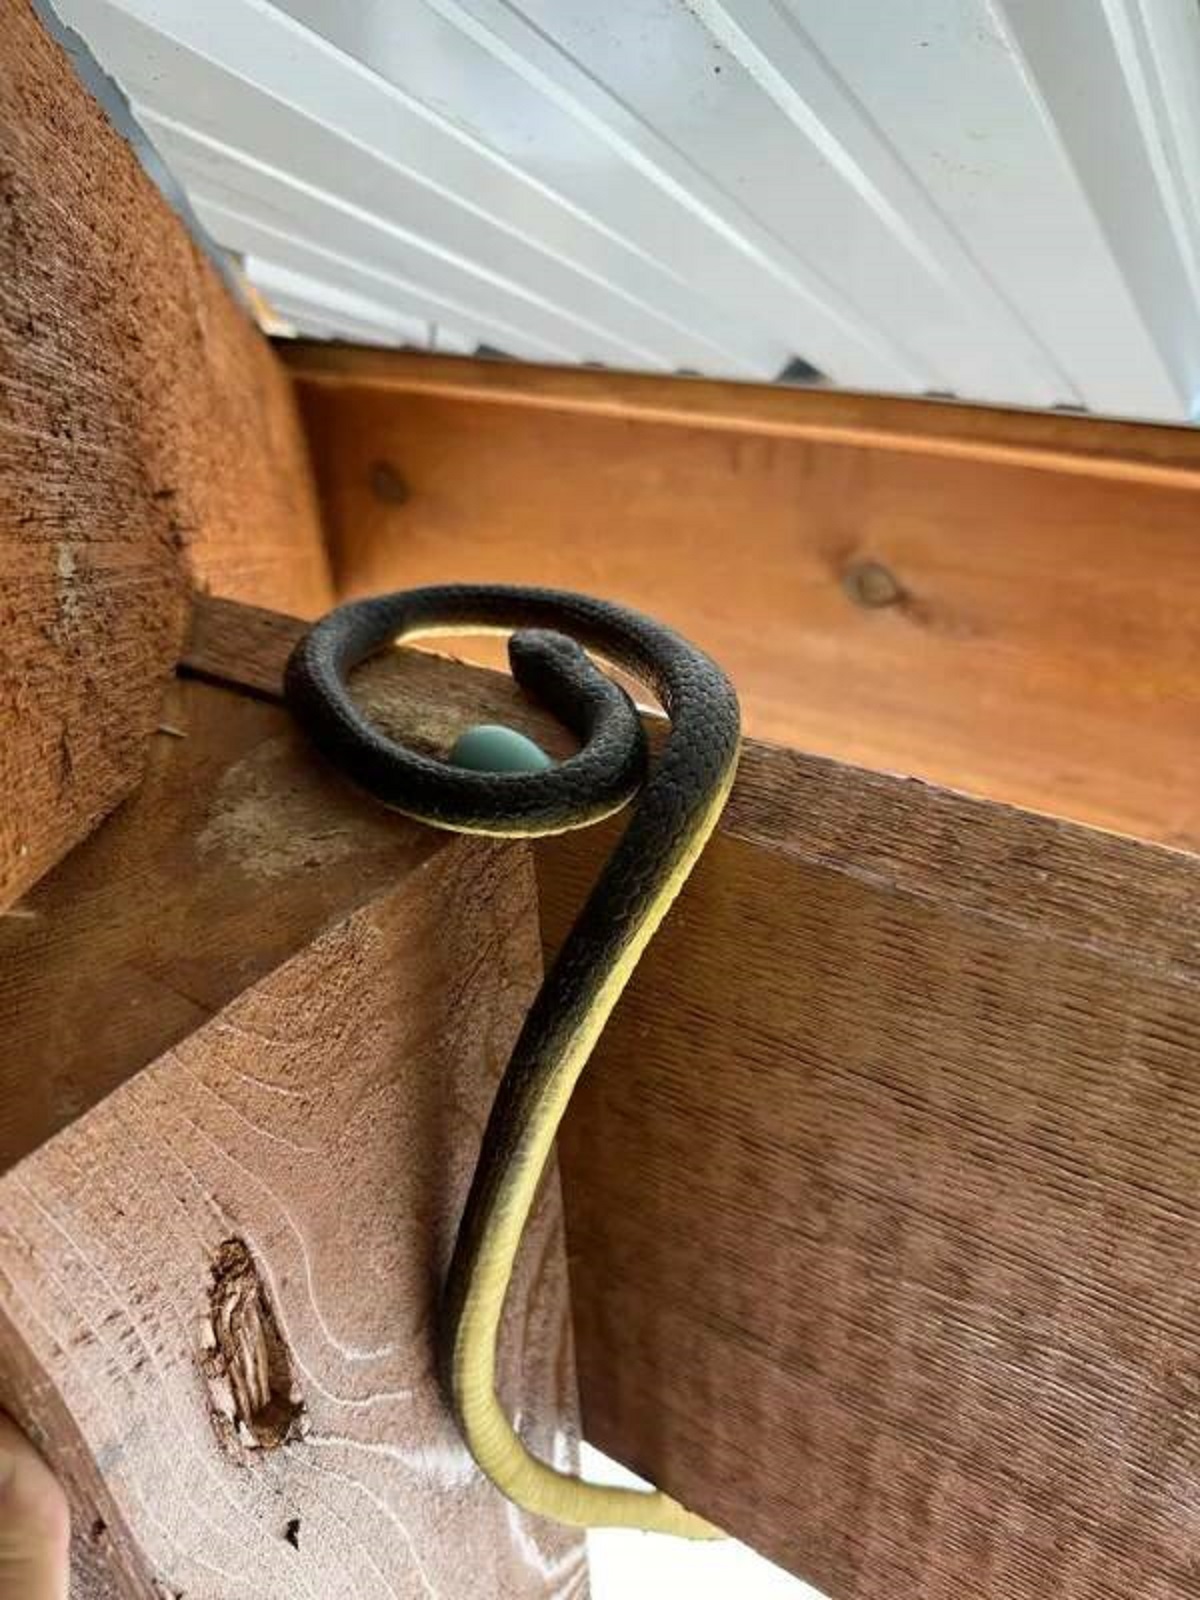 “Bought a fake snake to deter birds. Instead they used it as a nest.”